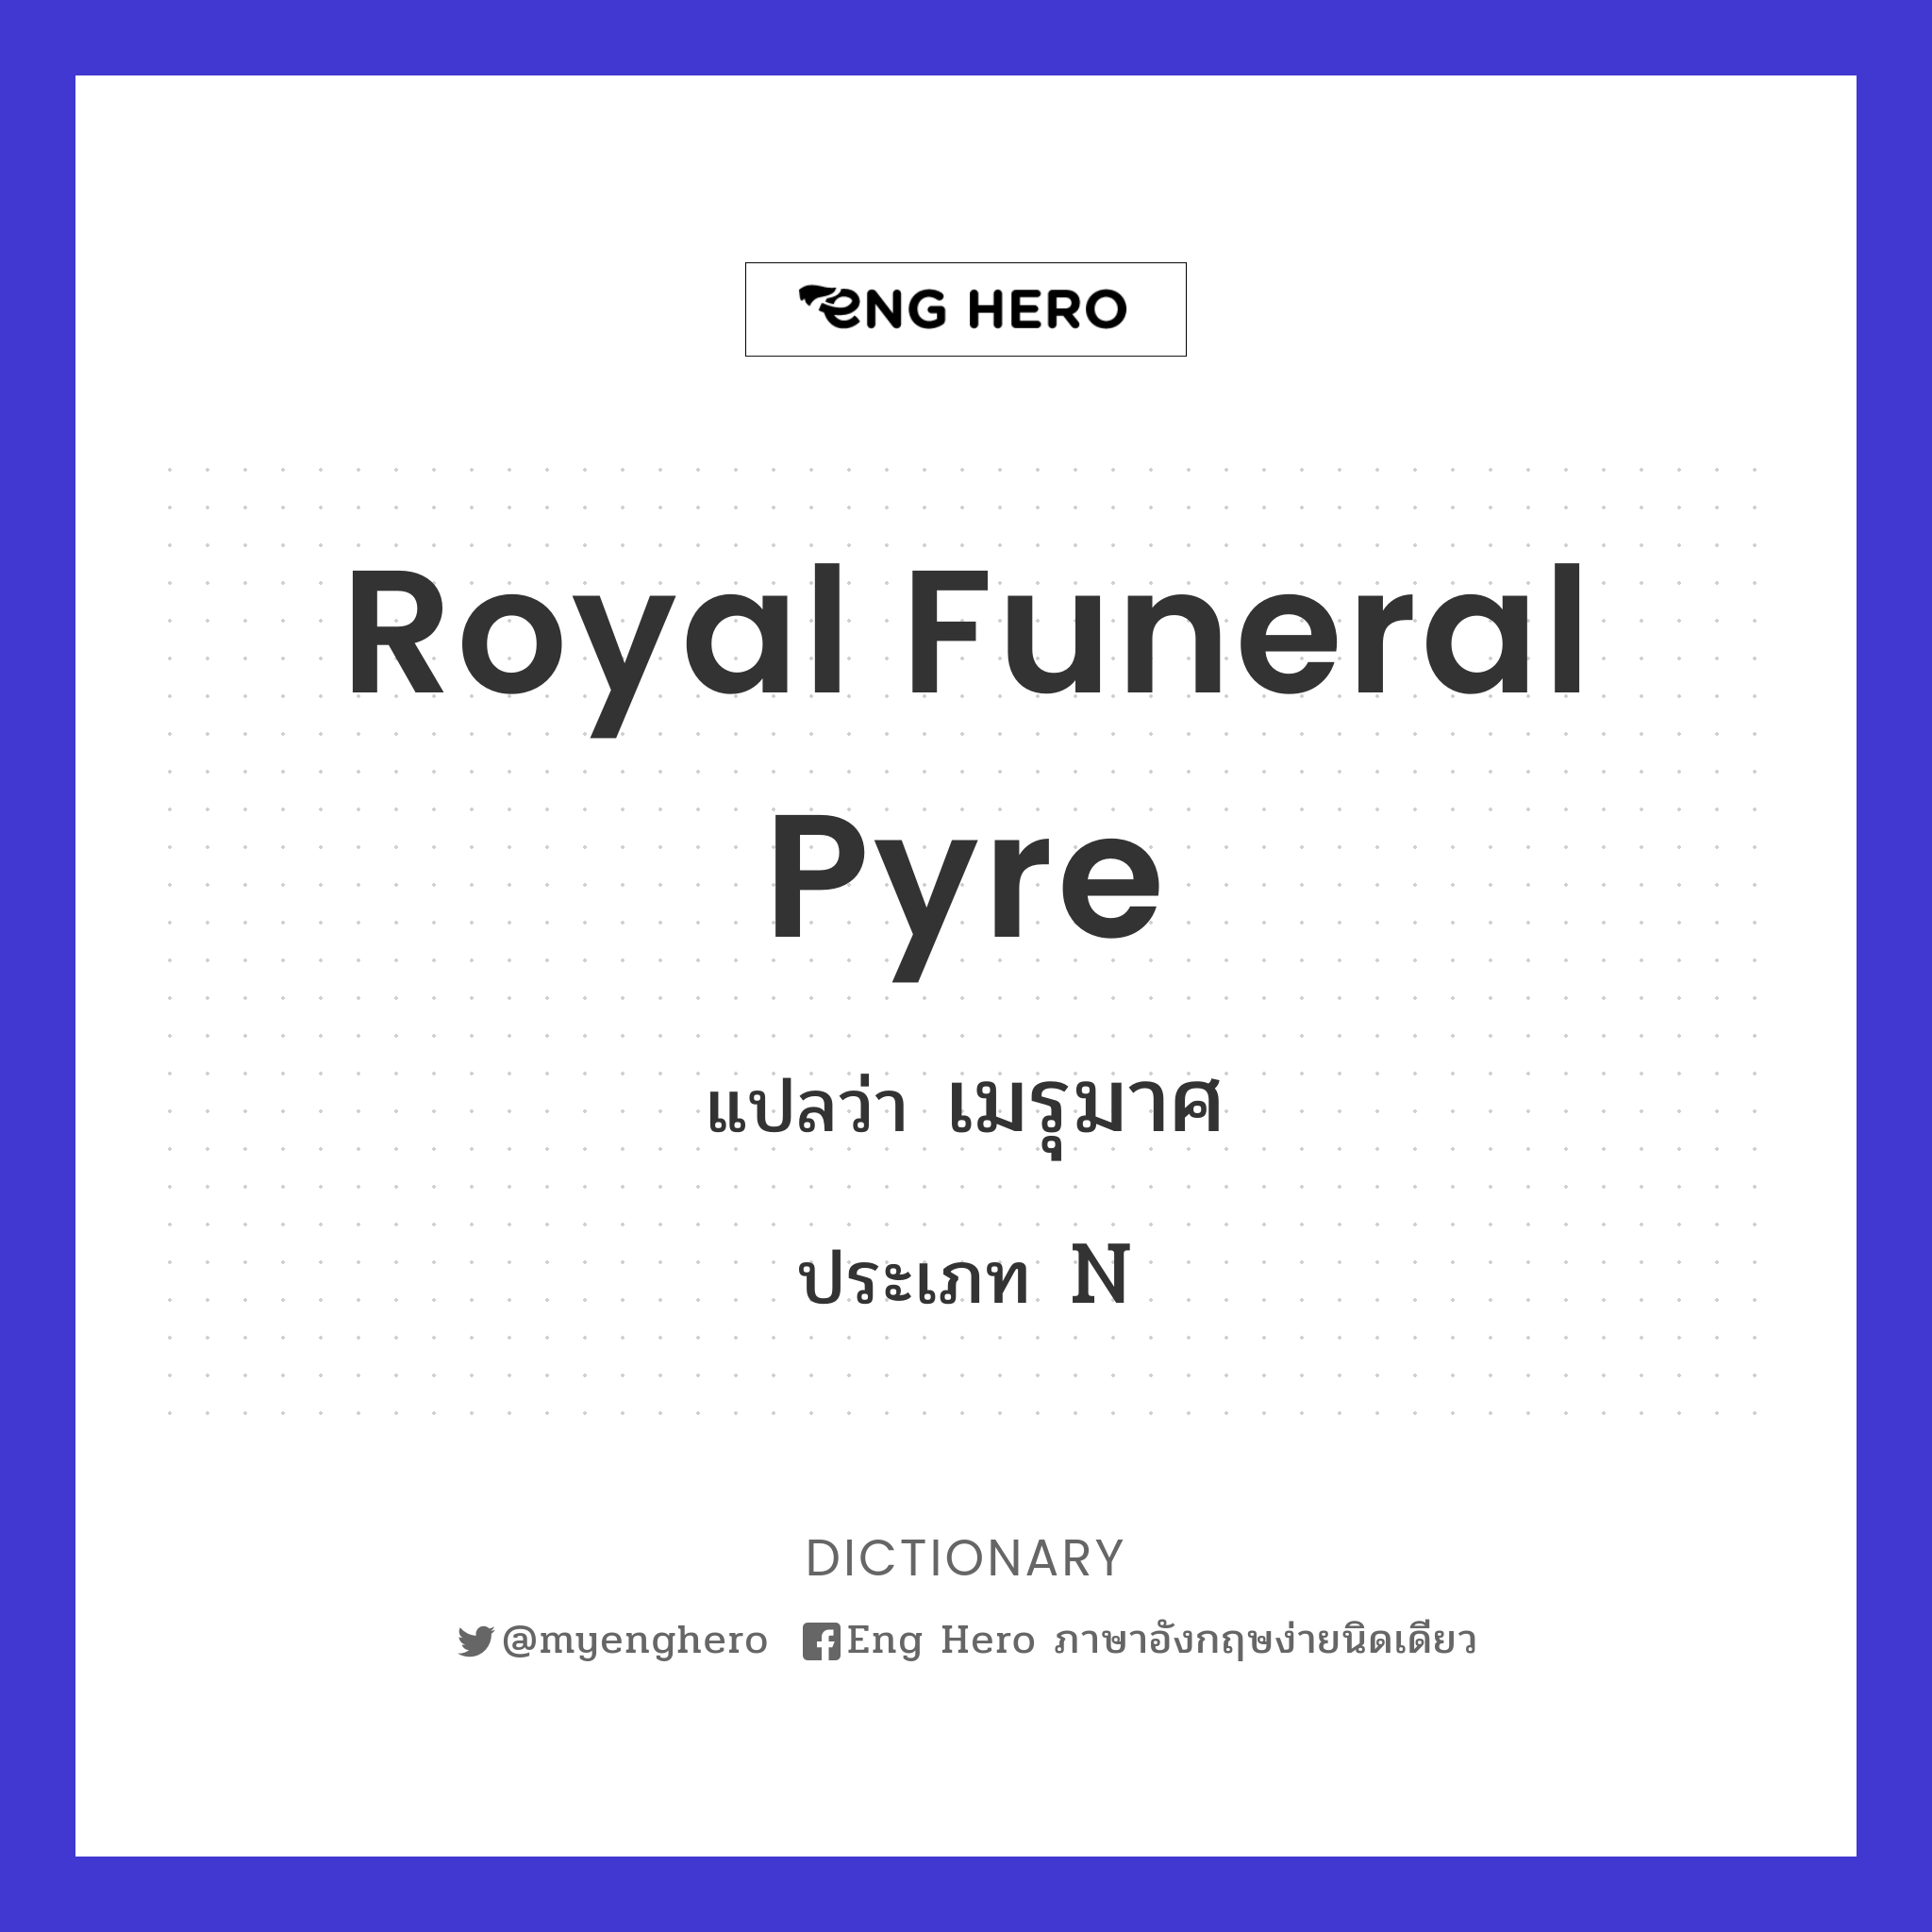 royal funeral pyre